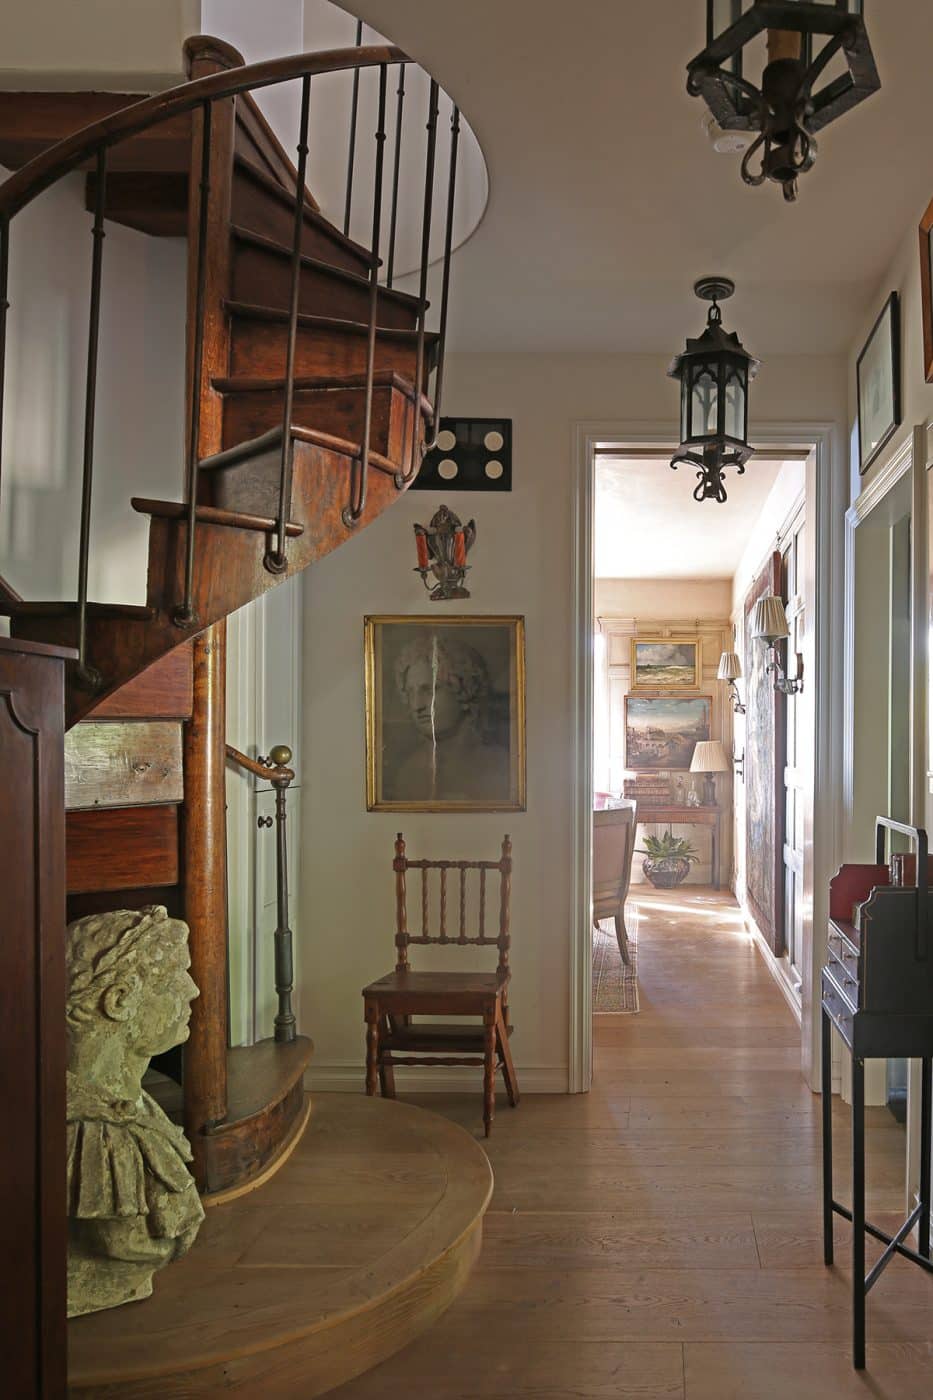 Lee Stanton vestibule with spiral staircase